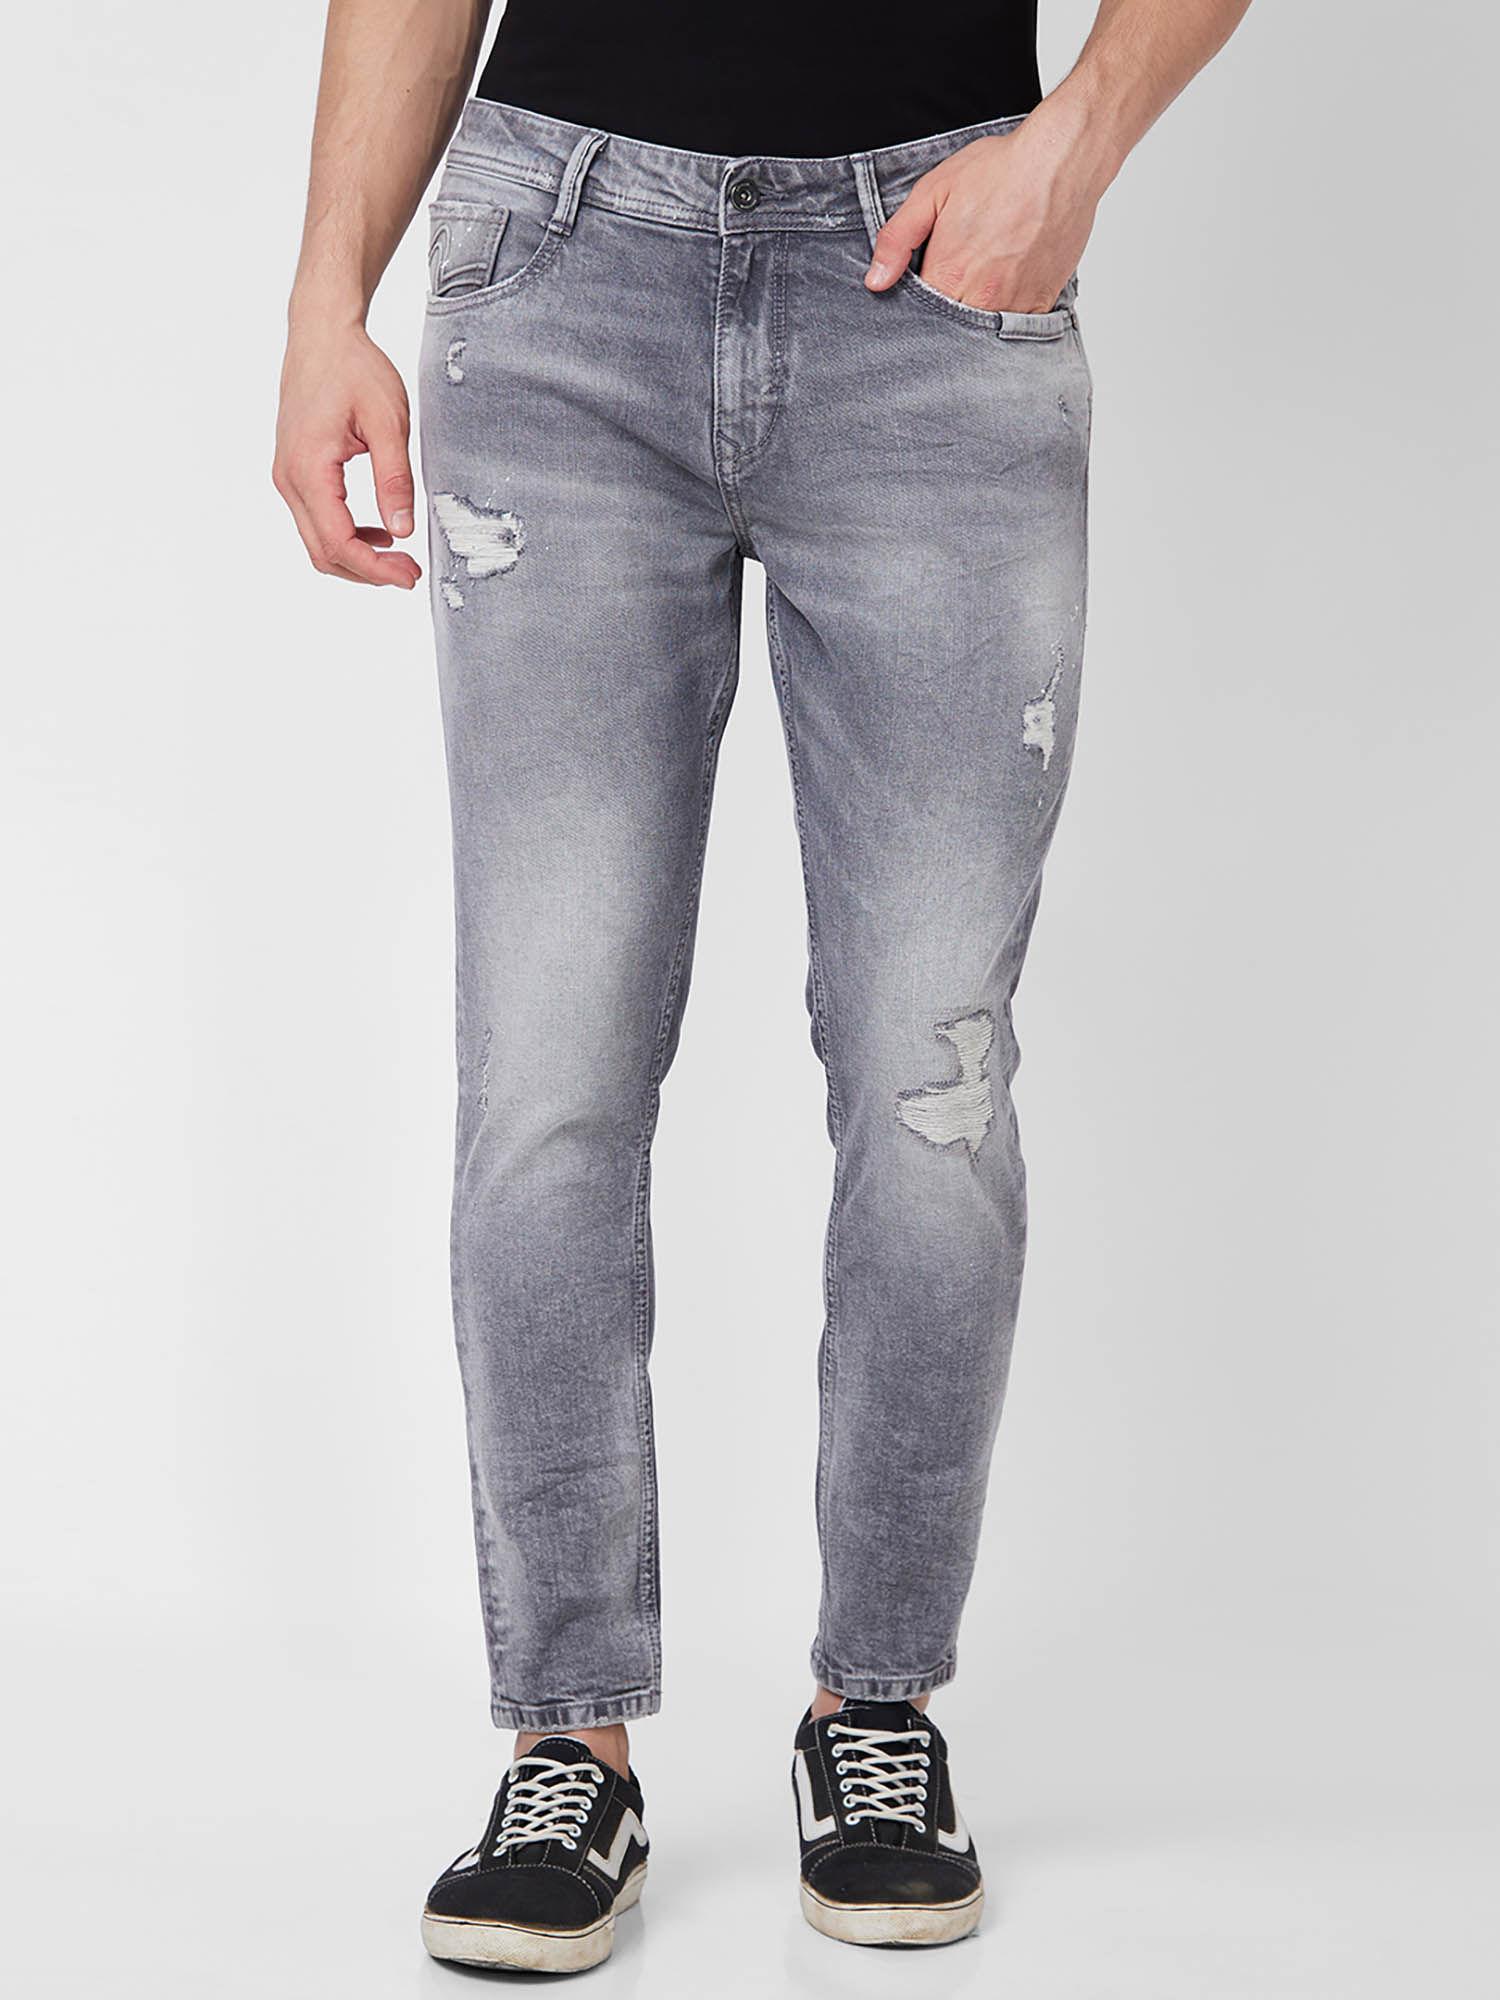 mid-rise-grey-jeans-for-men